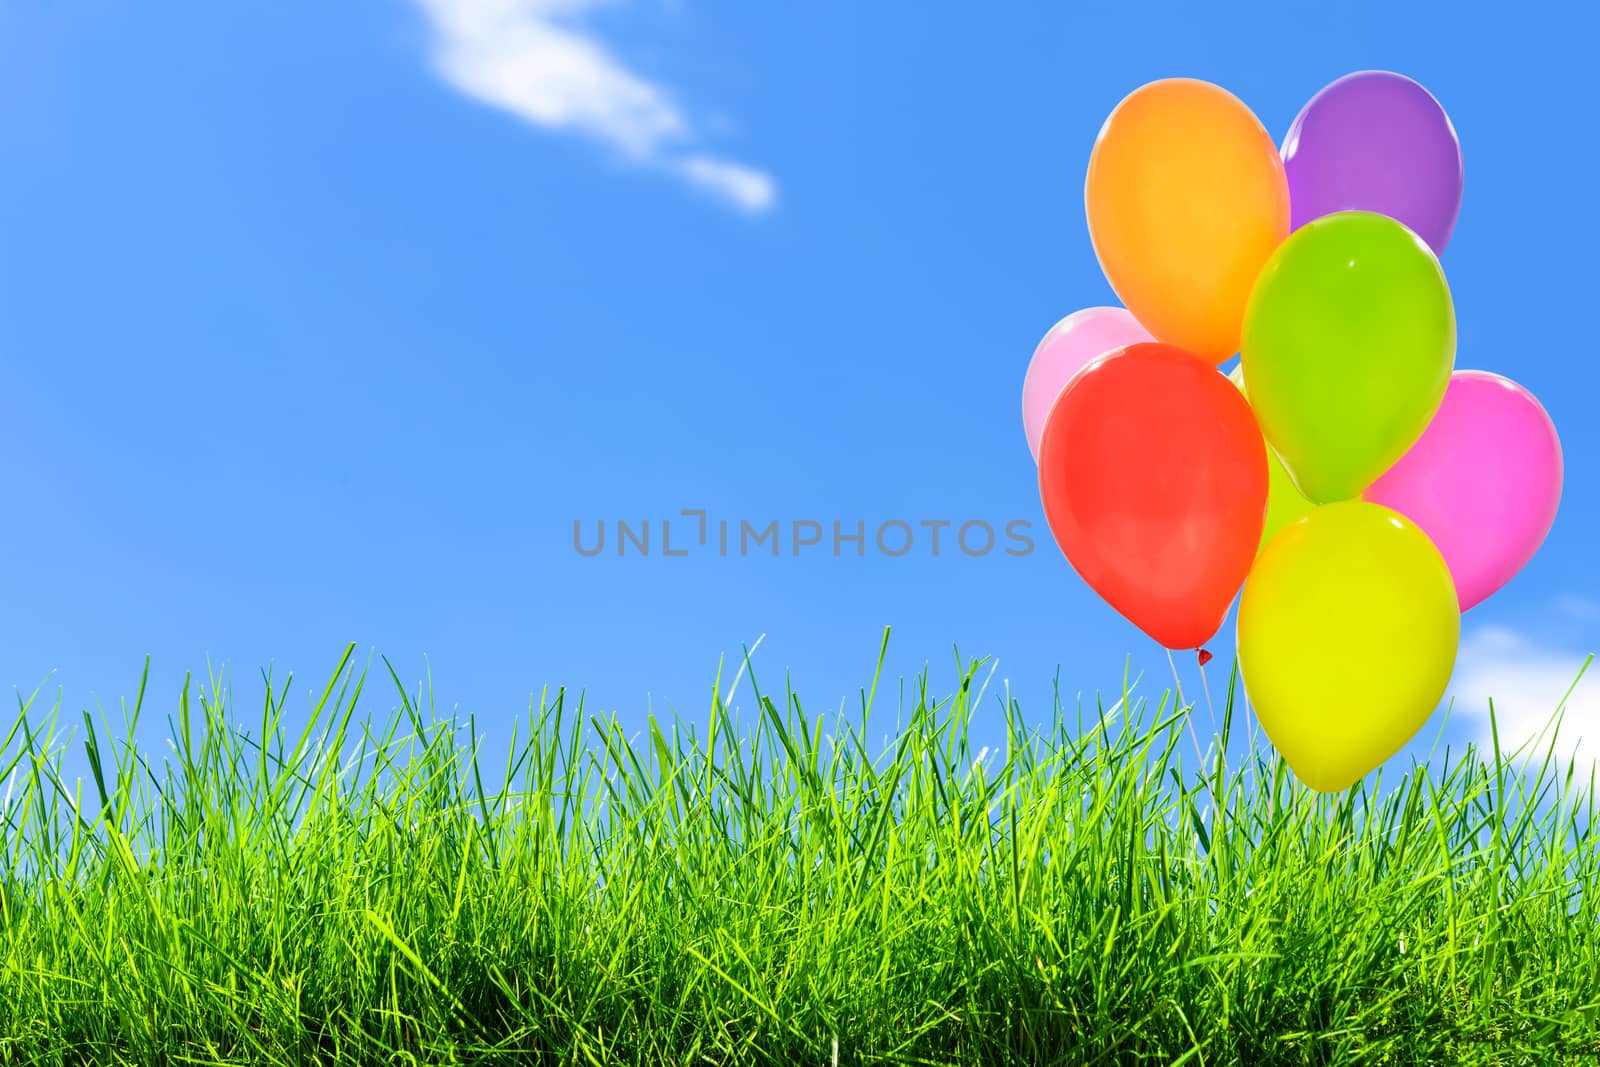 Group of colorful balloons by wdnet_studio